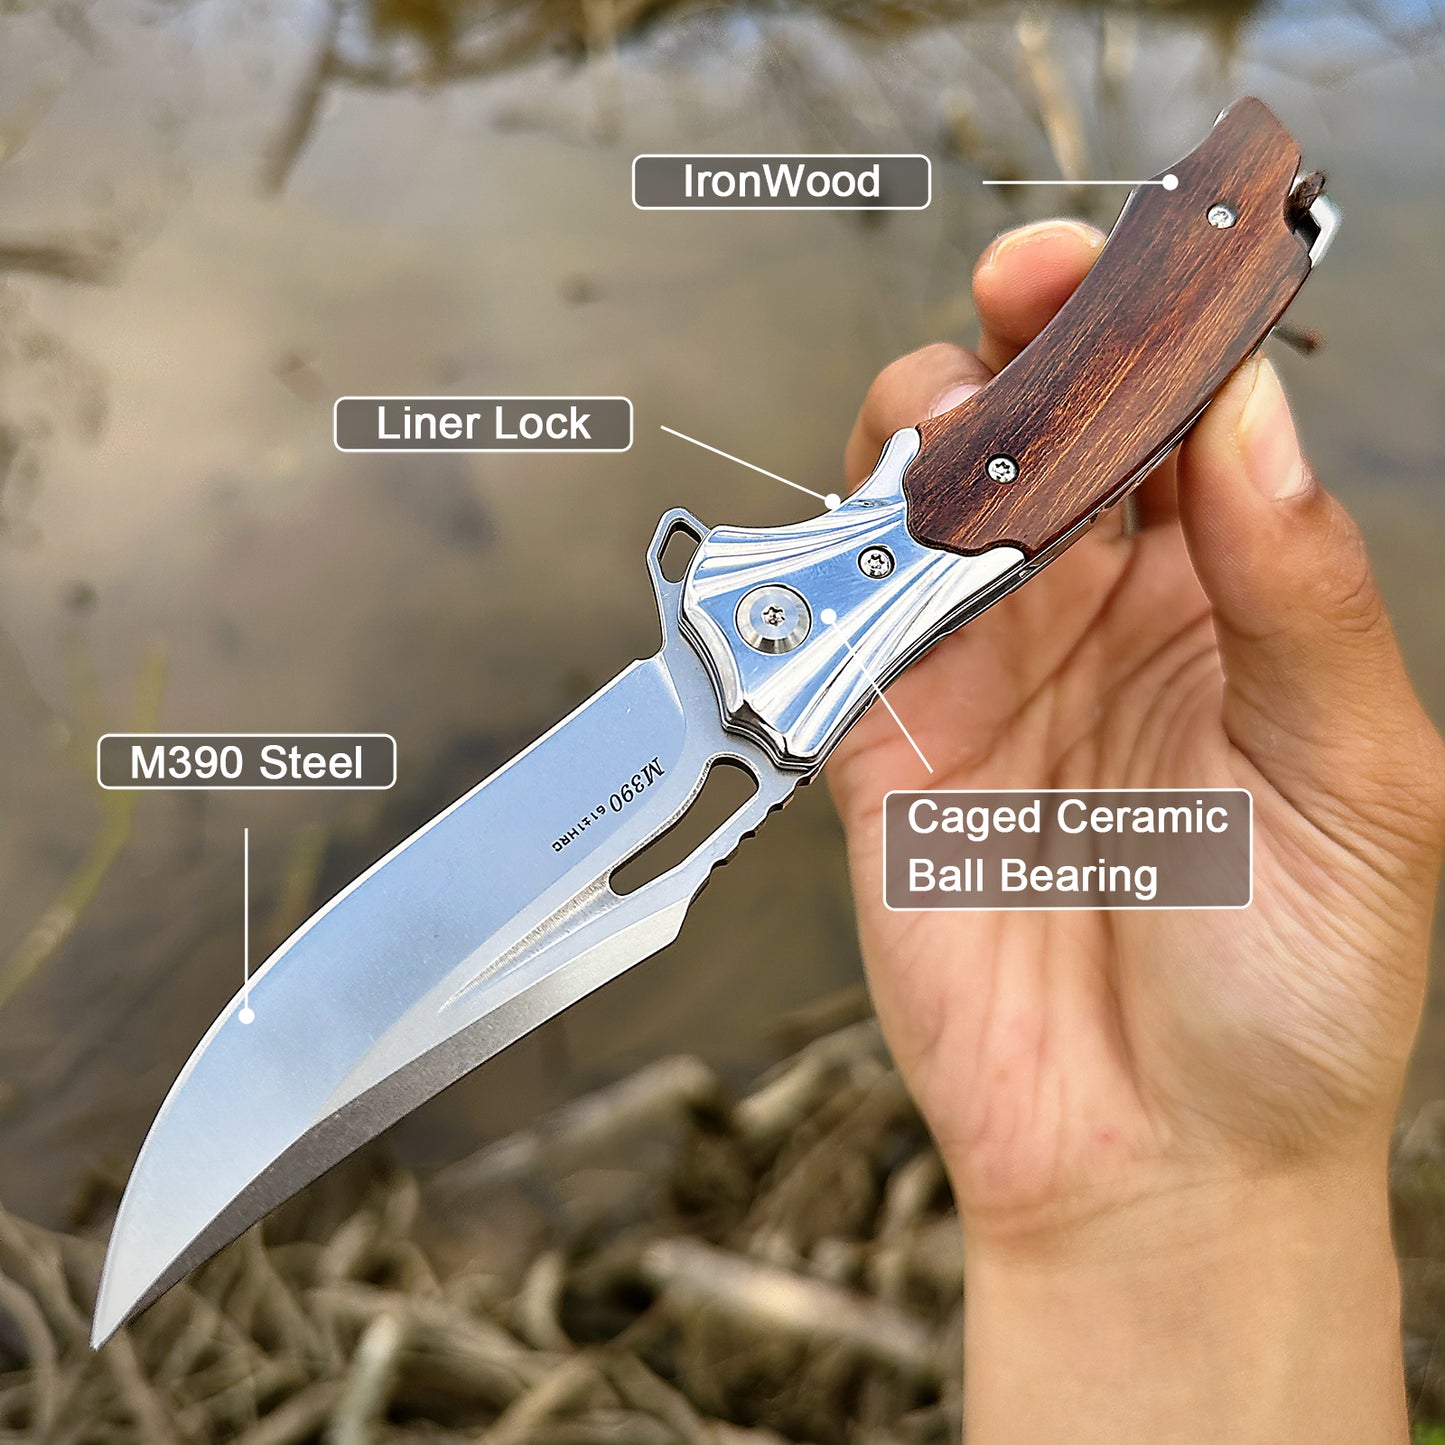 FORESAIL Flipper Pocket Folding Knife,M390 Steel Blade and Wood Handle. With leather case,men's pocket knife hiking trip EDC tool Knife.